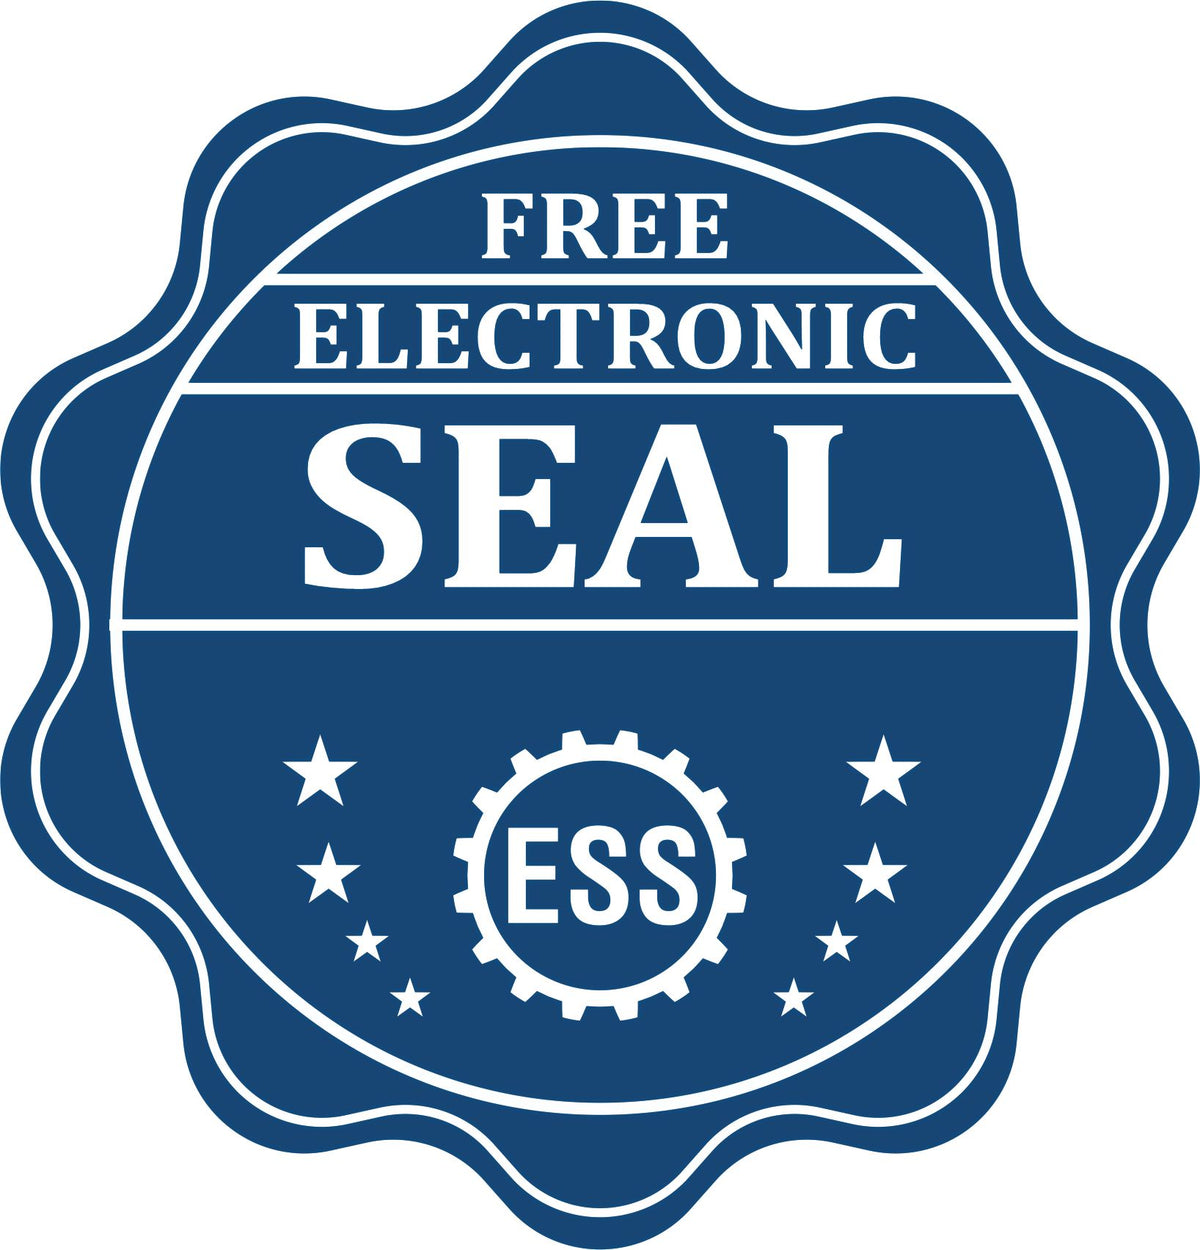 A badge showing a free electronic seal for the Hybrid Hawaii Land Surveyor Seal with stars and the ESS gear on the emblem.